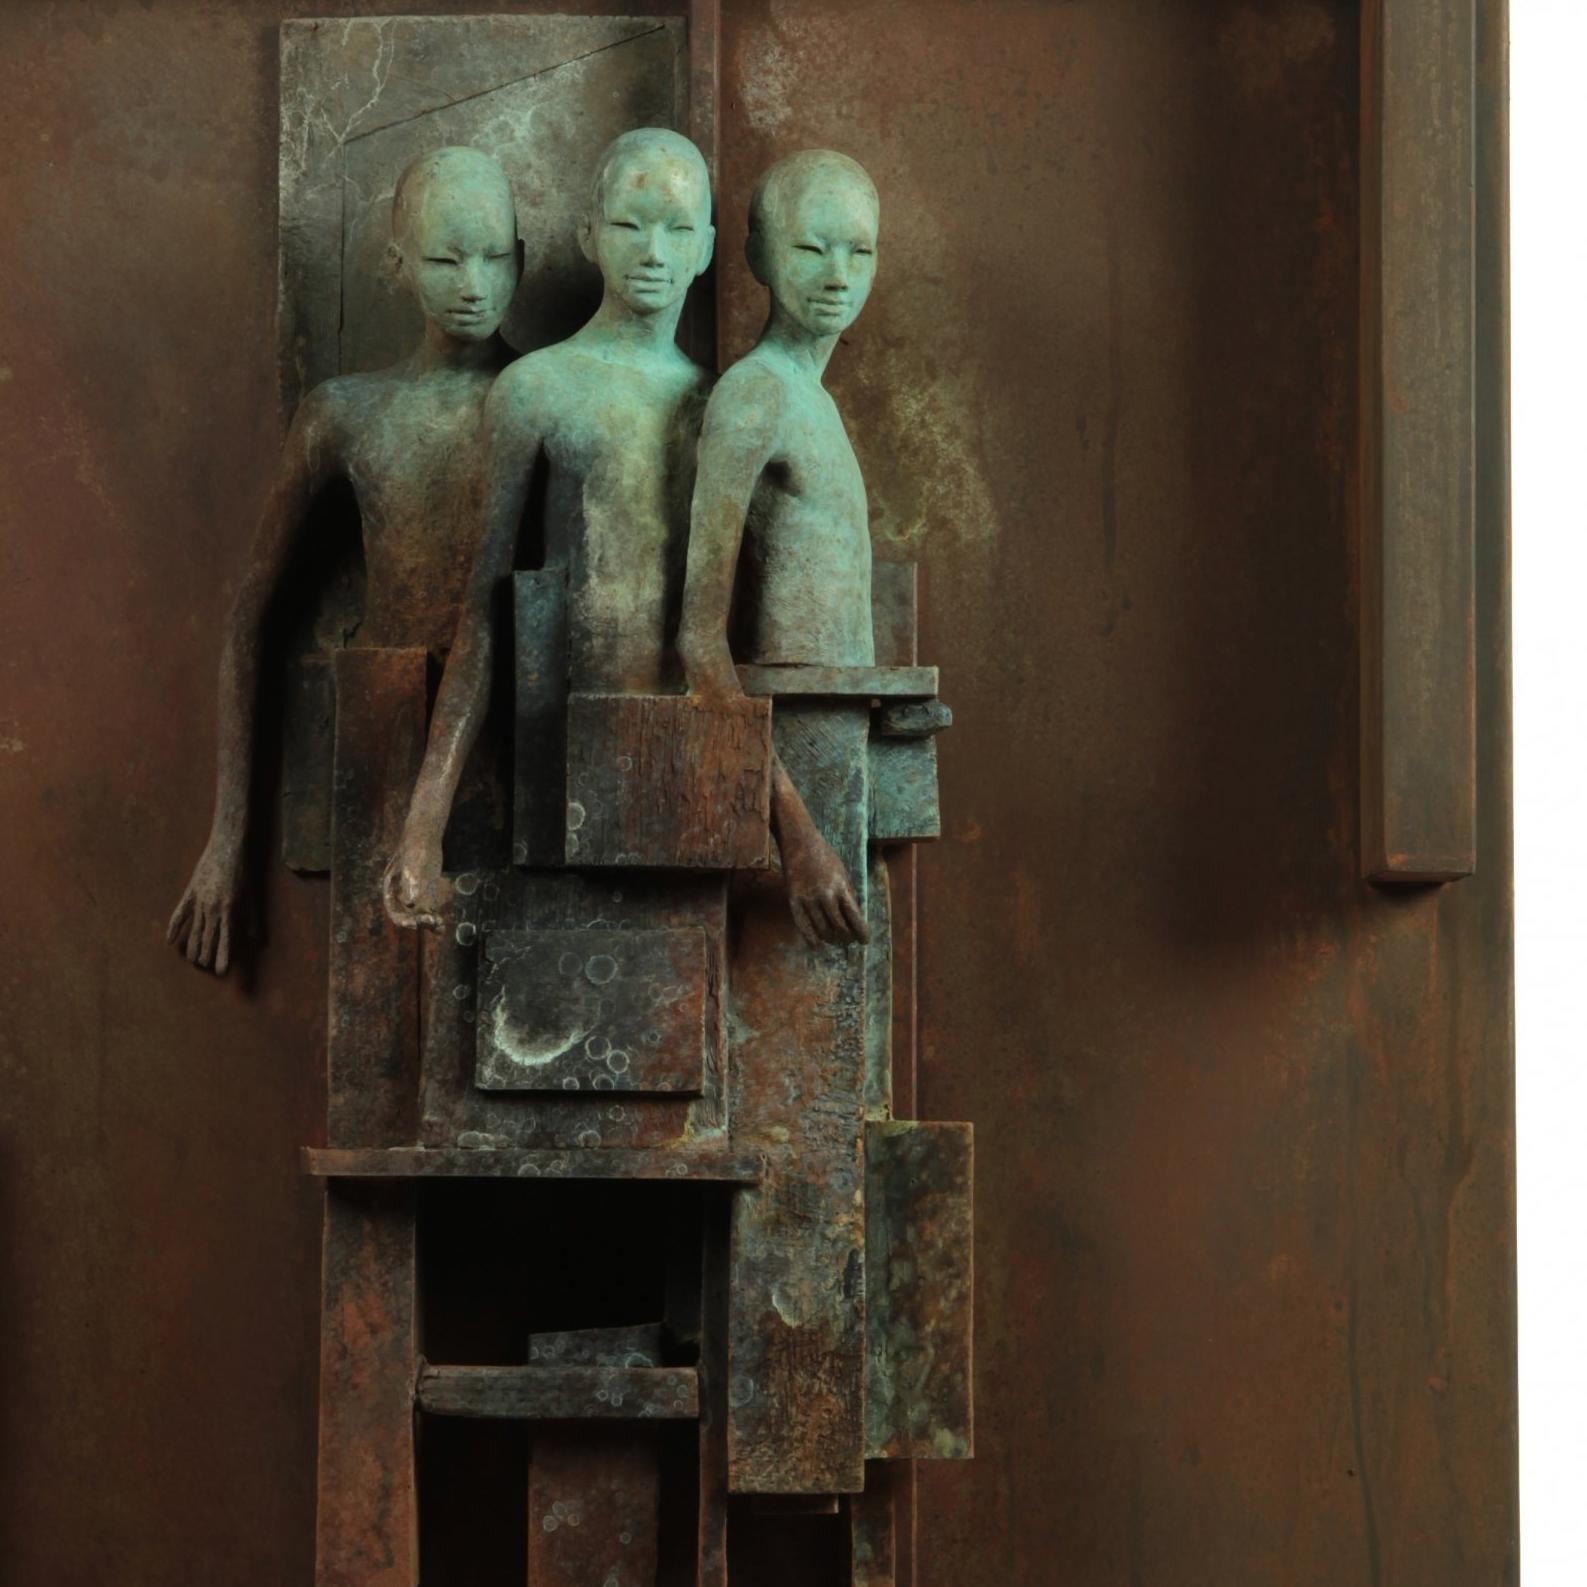 Escena III - Bronze and Steel Wall Sculpture with Three Abstracted Figures - Gold Abstract Sculpture by Jesus Curia Perez